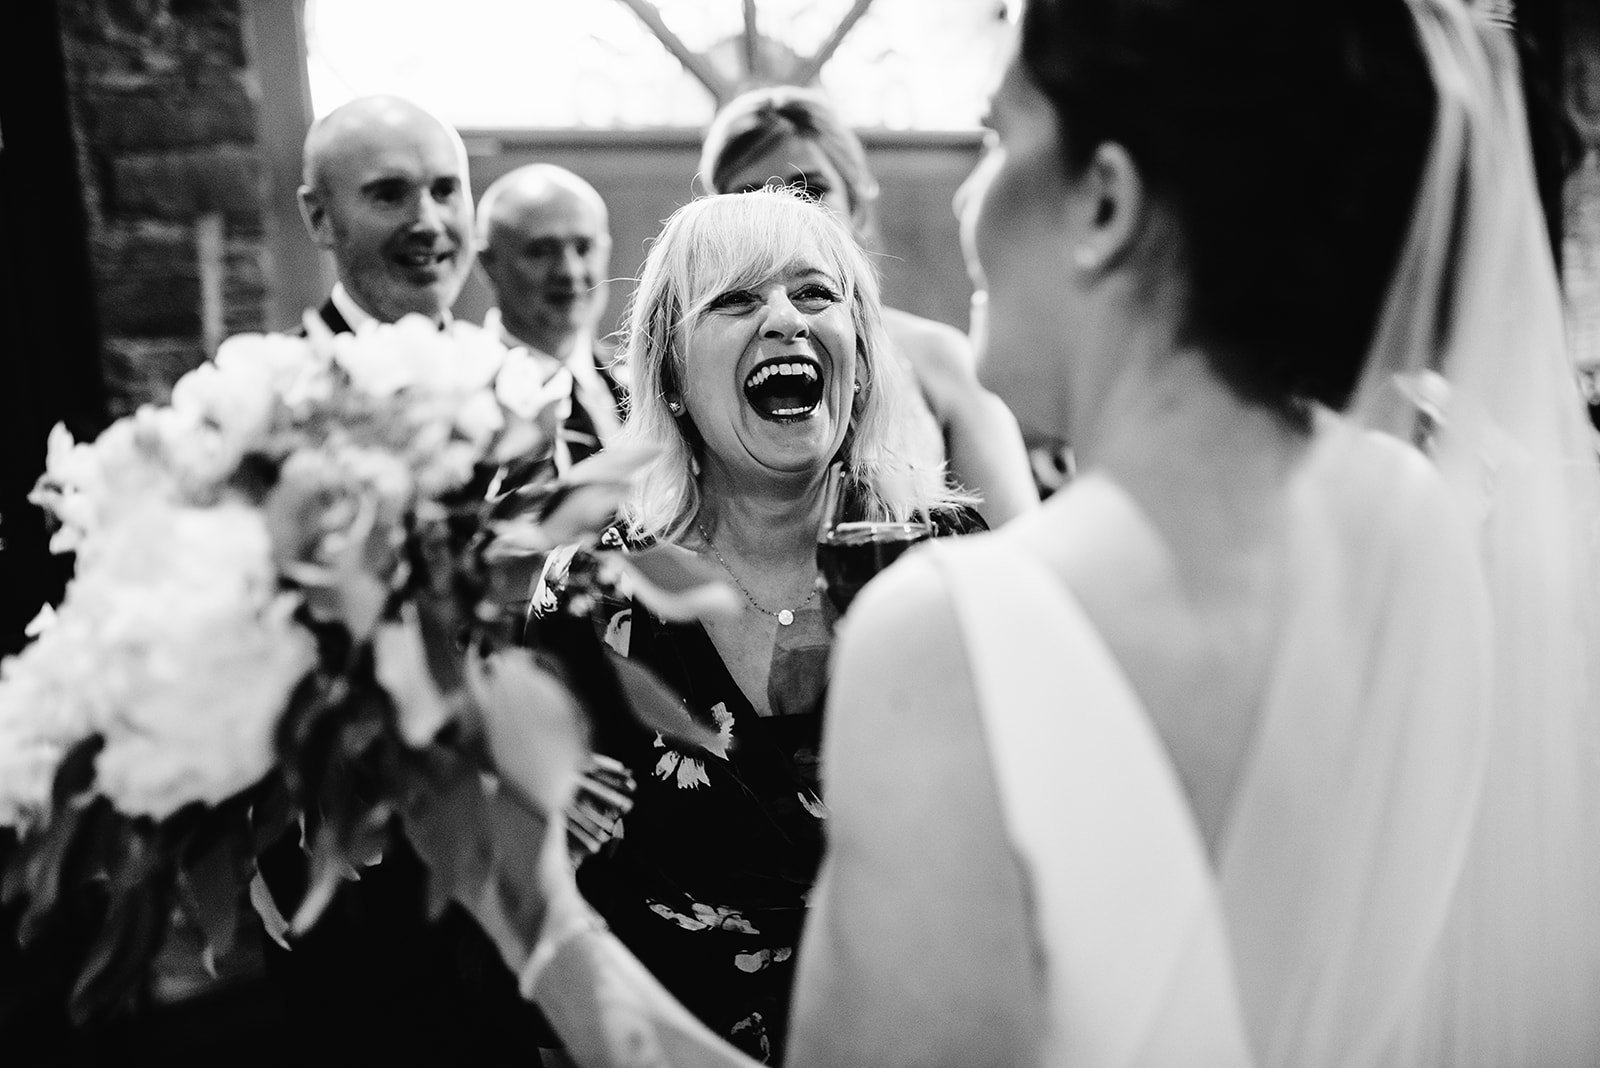 Guests laughing with the couple